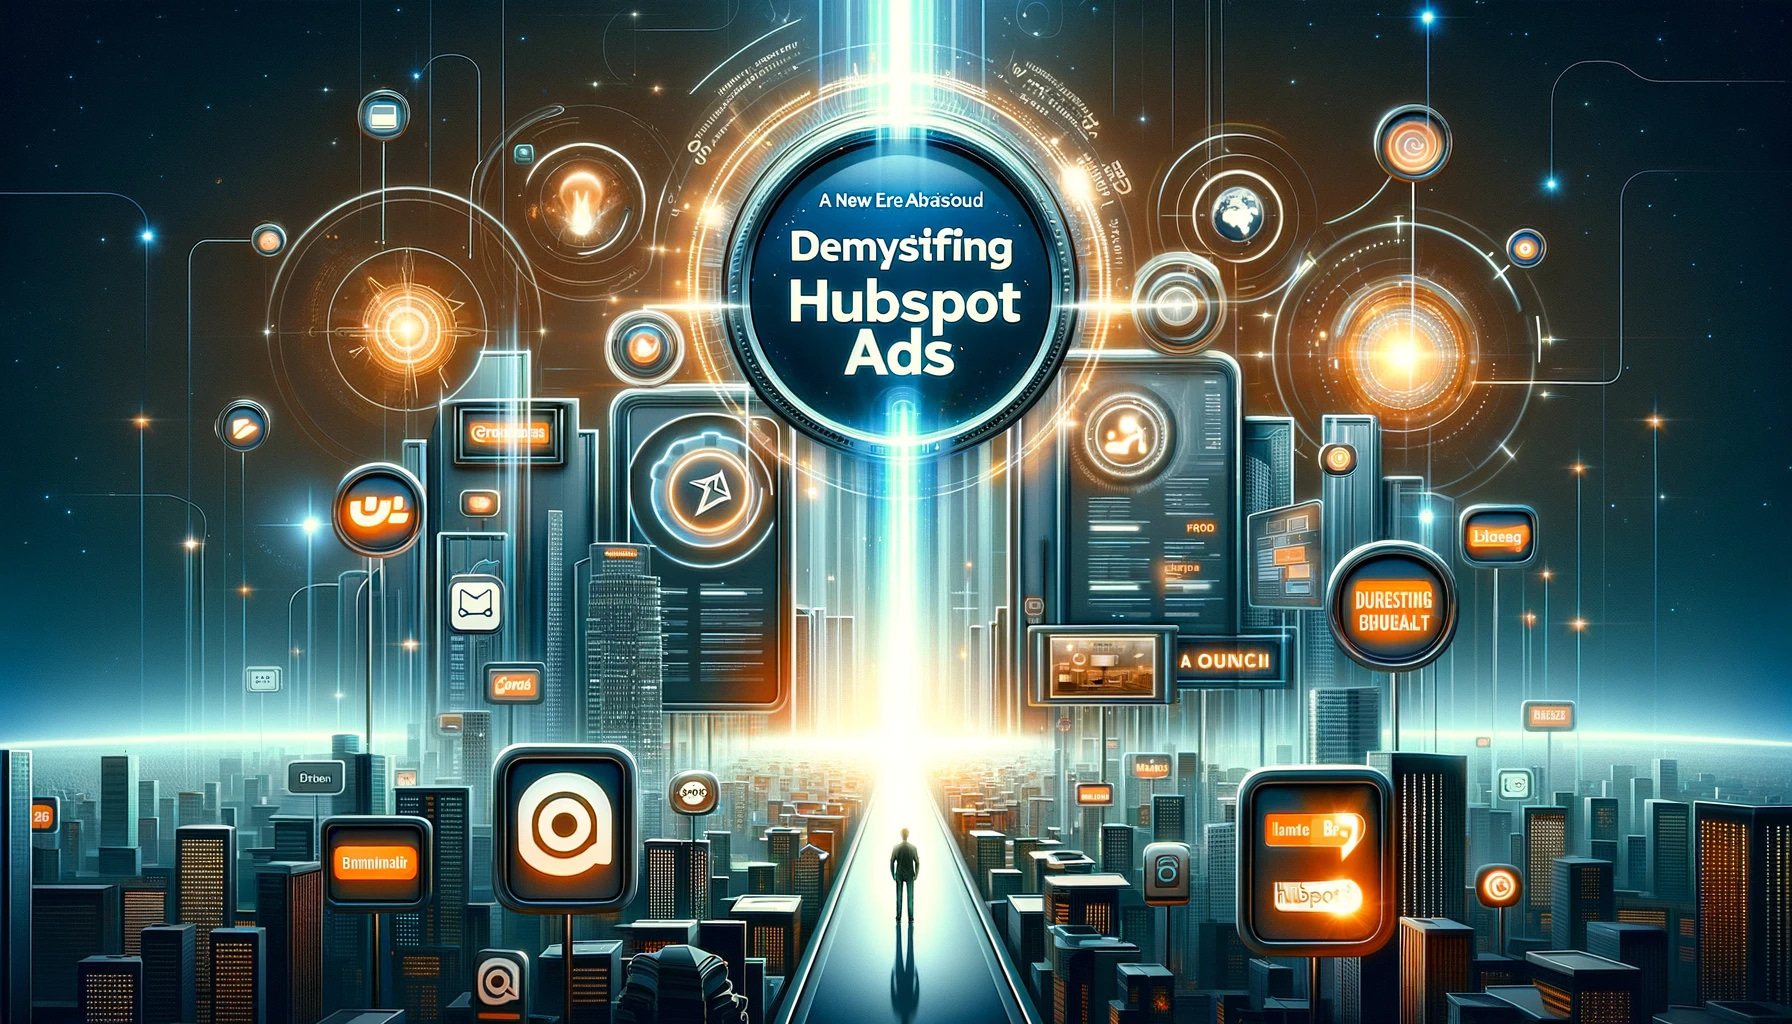 Demystifying HubSpot Ads With Your Hubspot Account